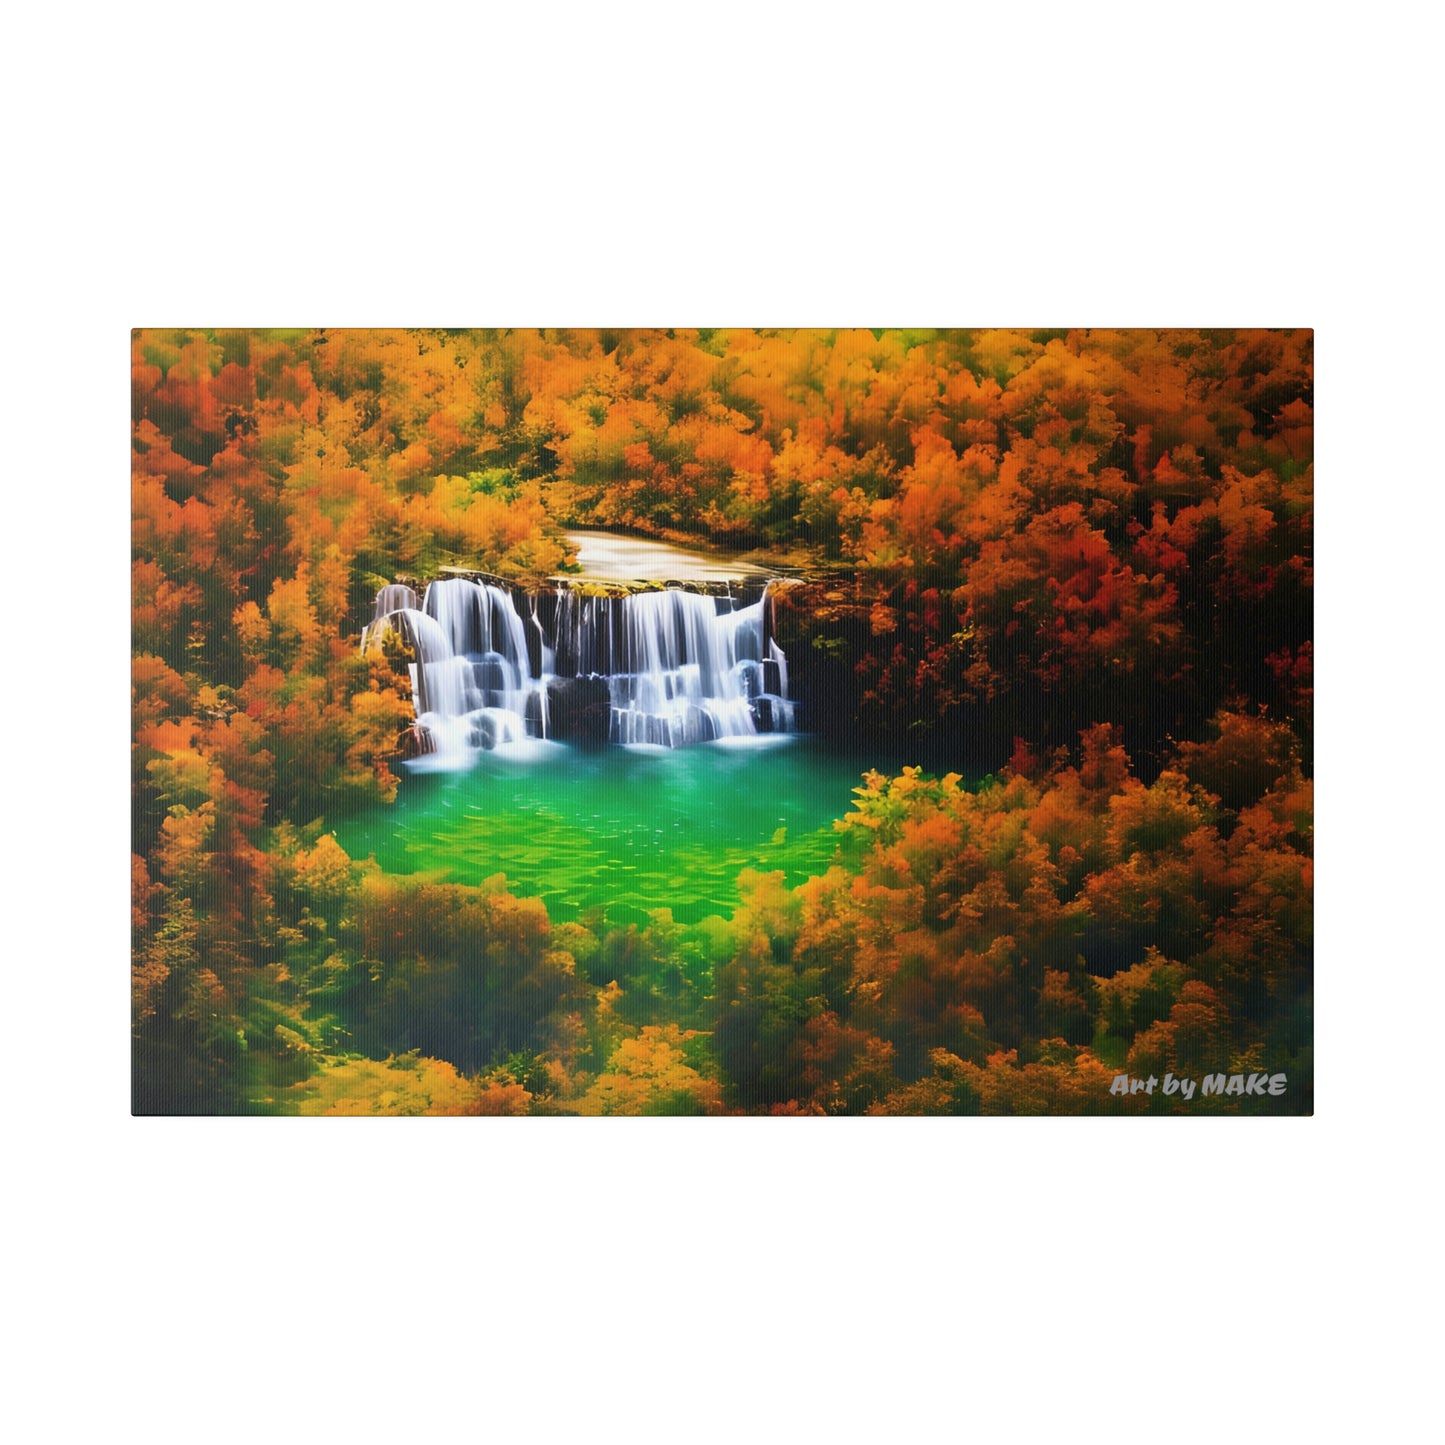 American Nature Streams 3 - 24"x16" Matte Canvas, Stretched, 0.75"